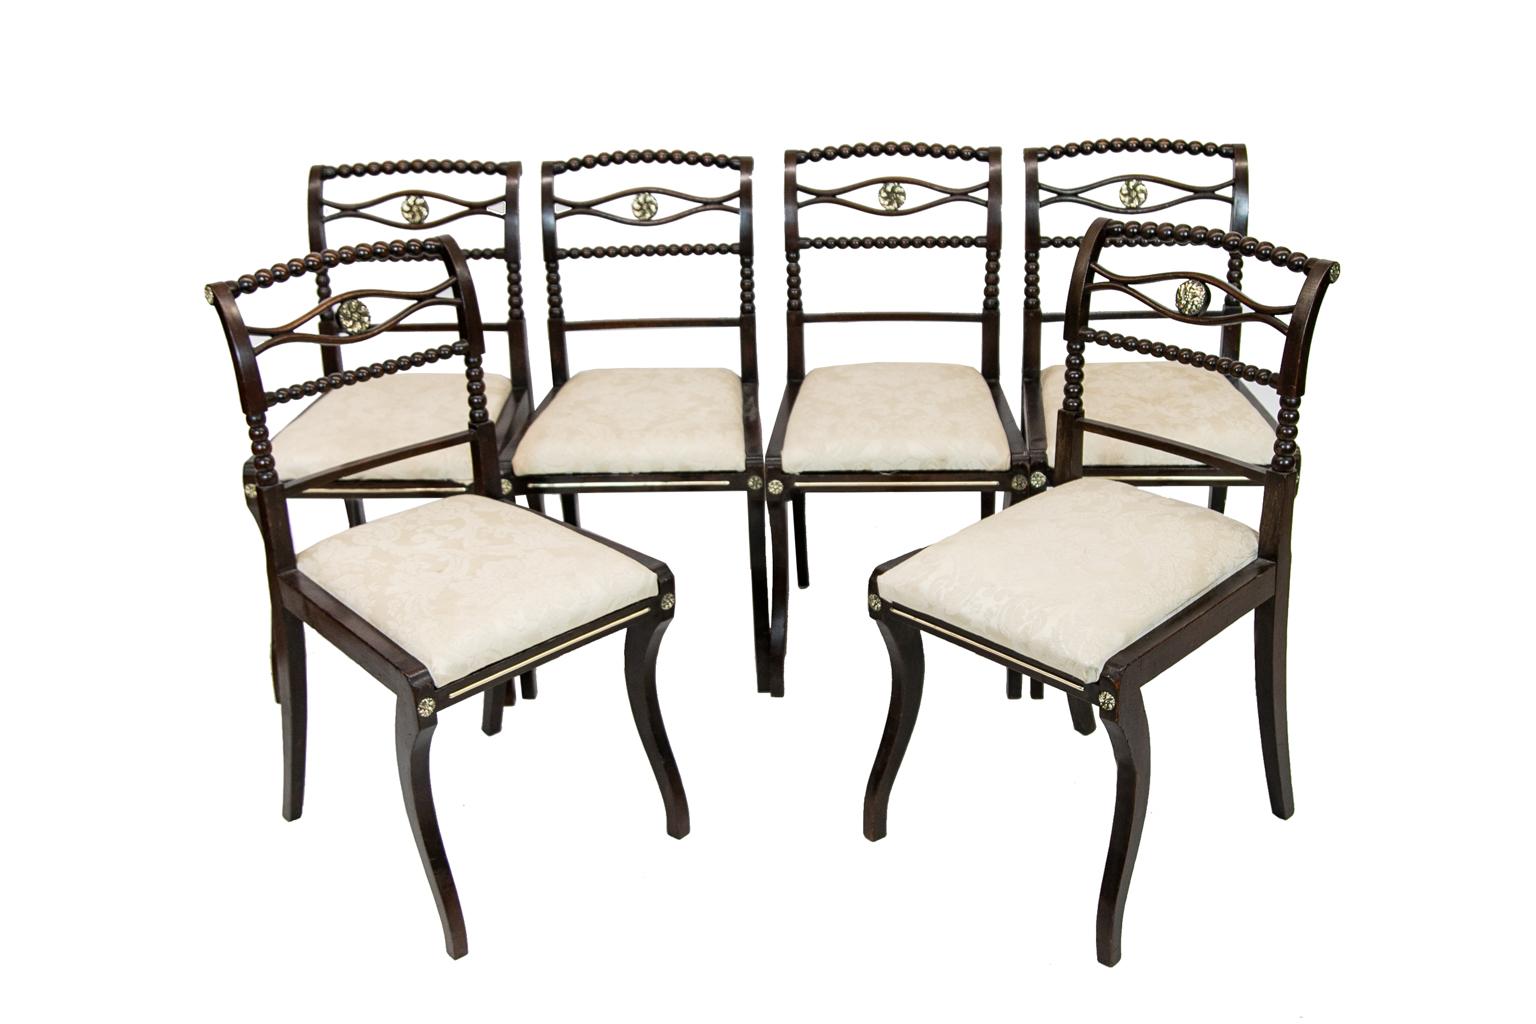 Set of six English Regency side chairs are fruitwood with floral brass medallions in the center cross splat. Each has bobbin turned crest rail, cross splat, and stiles. The front legs are ogee shaped and there are brass ray inlaid in the front